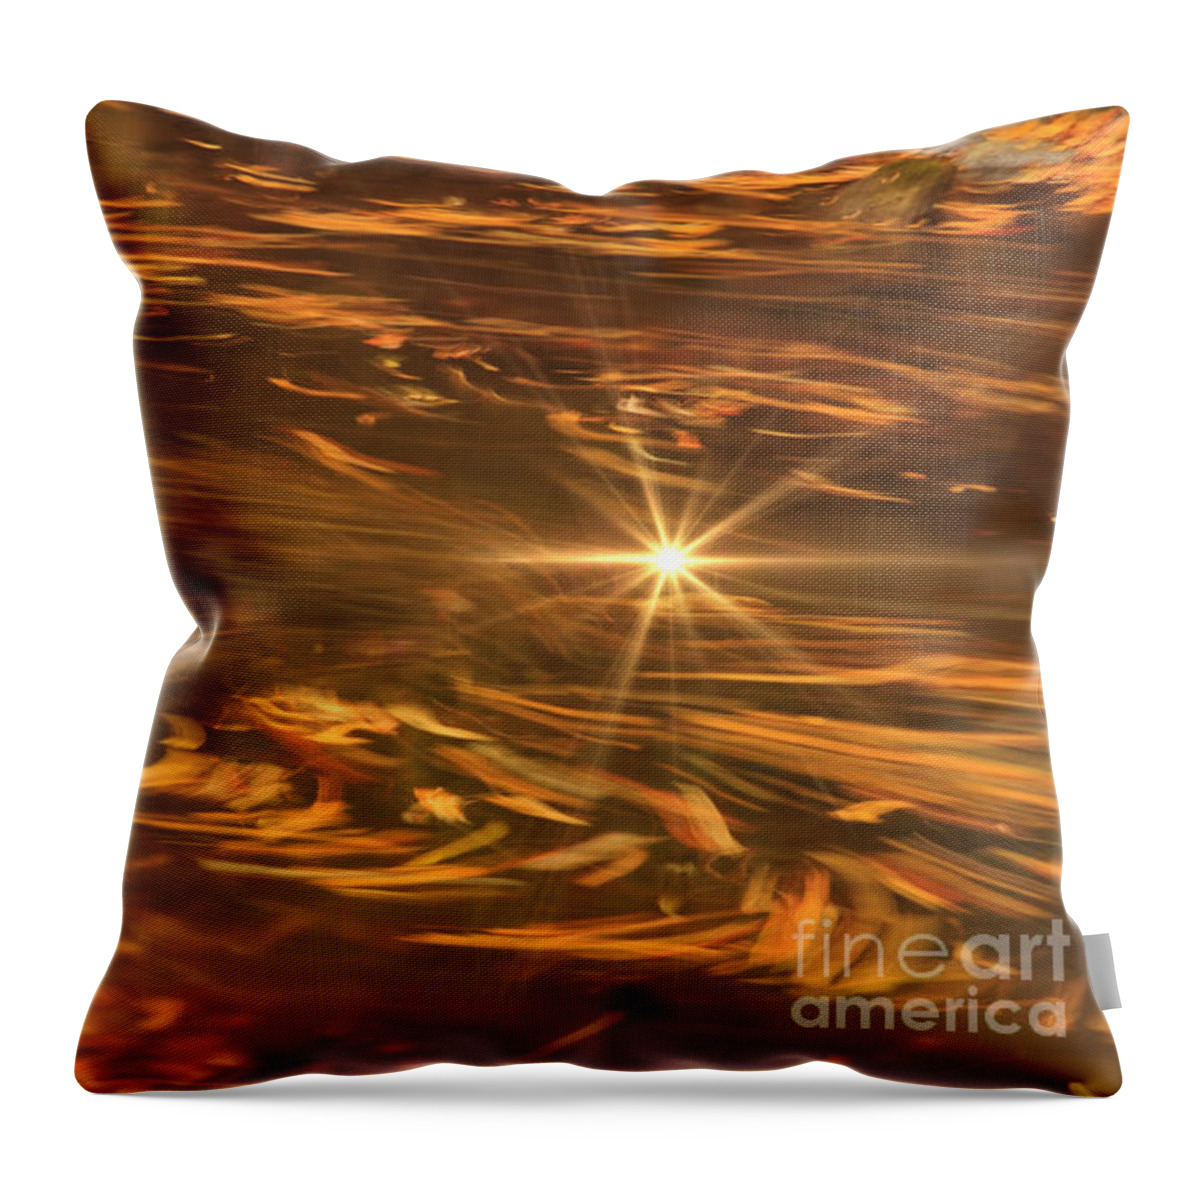 Leaves Throw Pillow featuring the photograph Swirling Autumn Leaves by Geraldine DeBoer